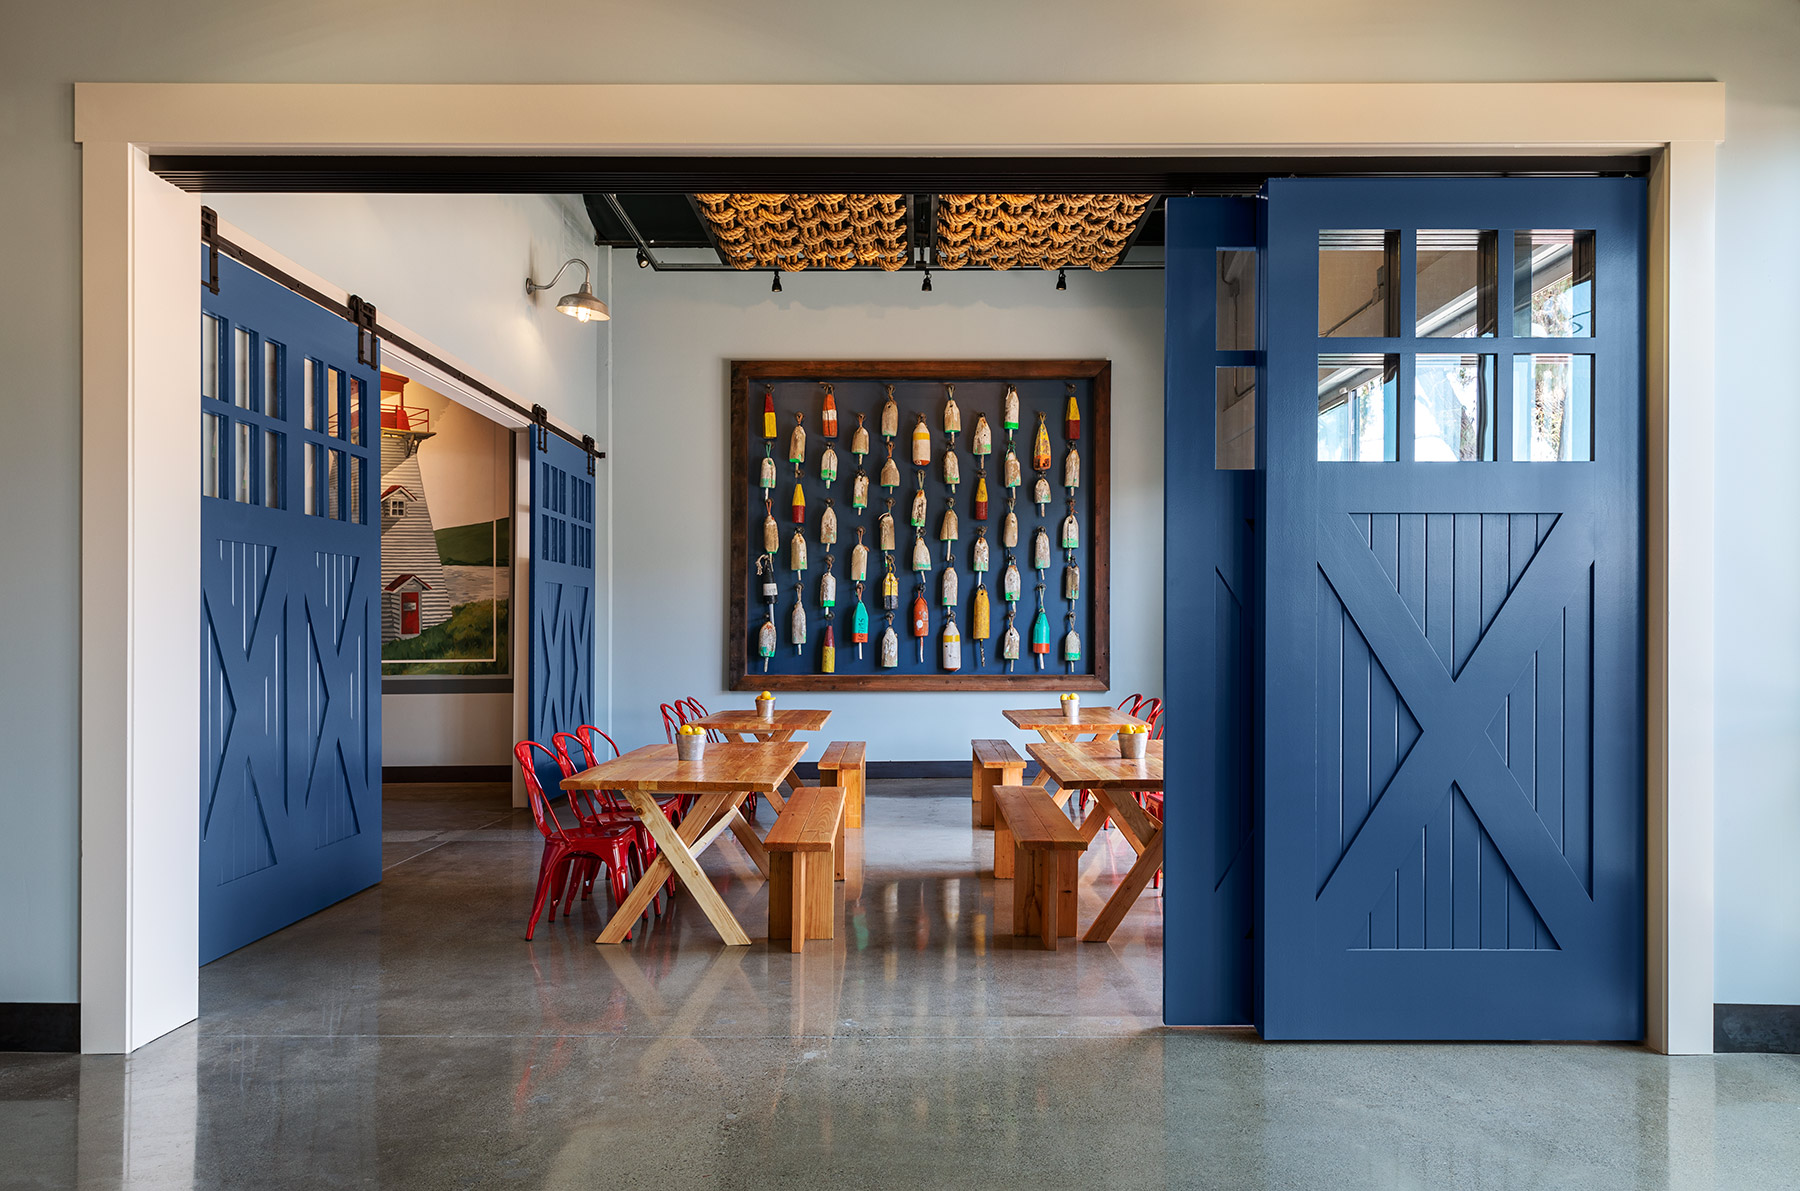   UMK Architecture  | New England Lobster Market &amp; Eatery 